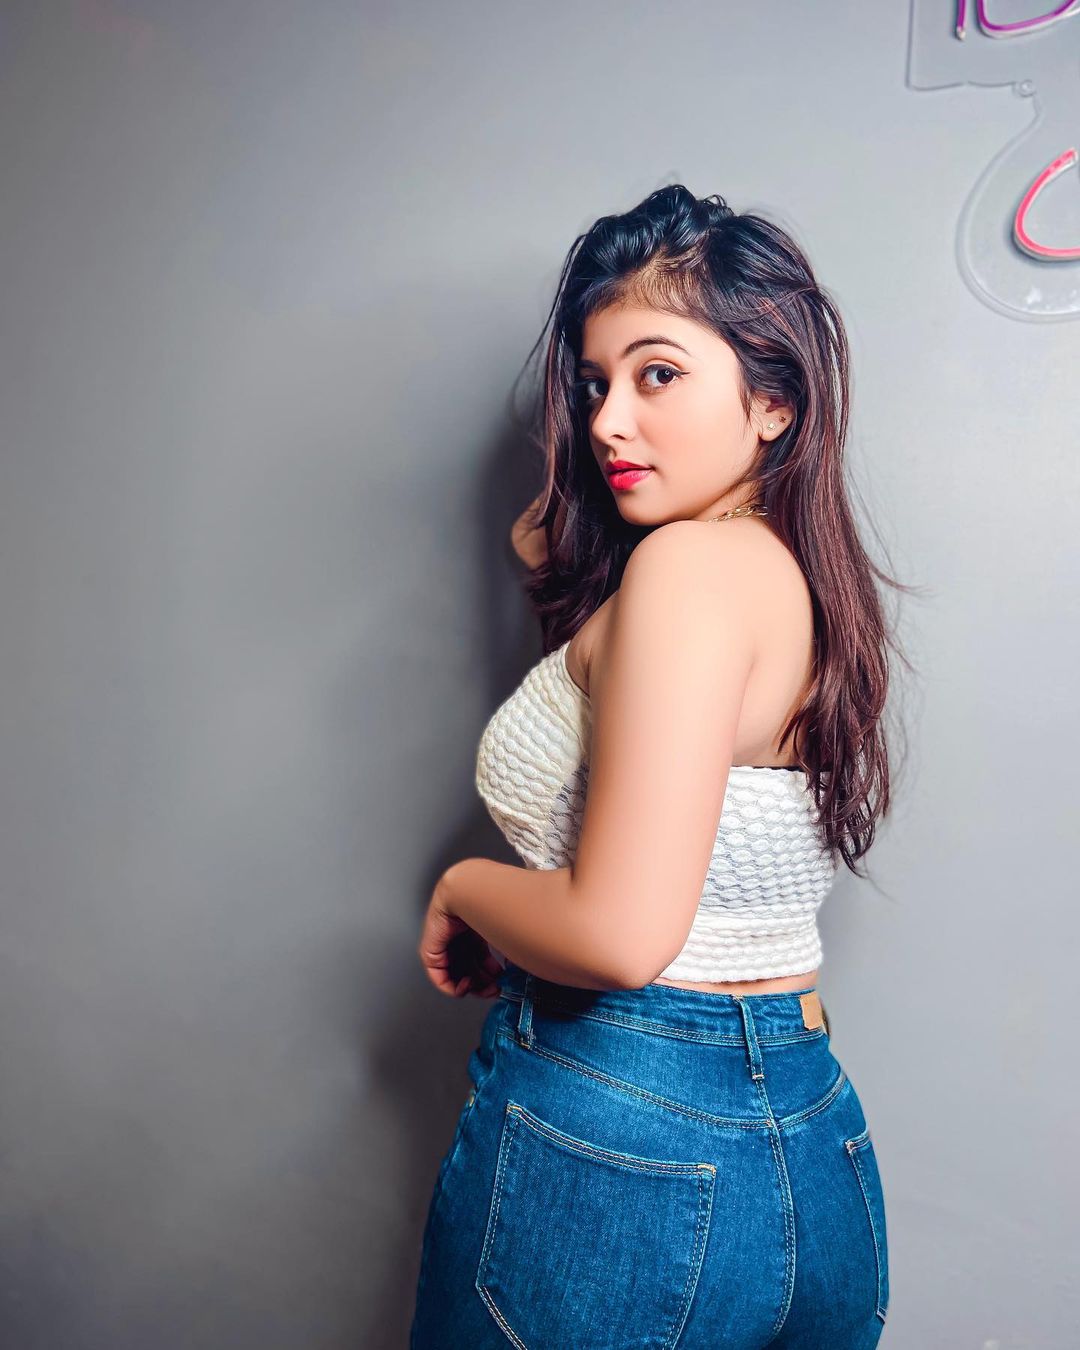 Riya Pandey age, height, boyfriend, body size, qualification and some interesting facts